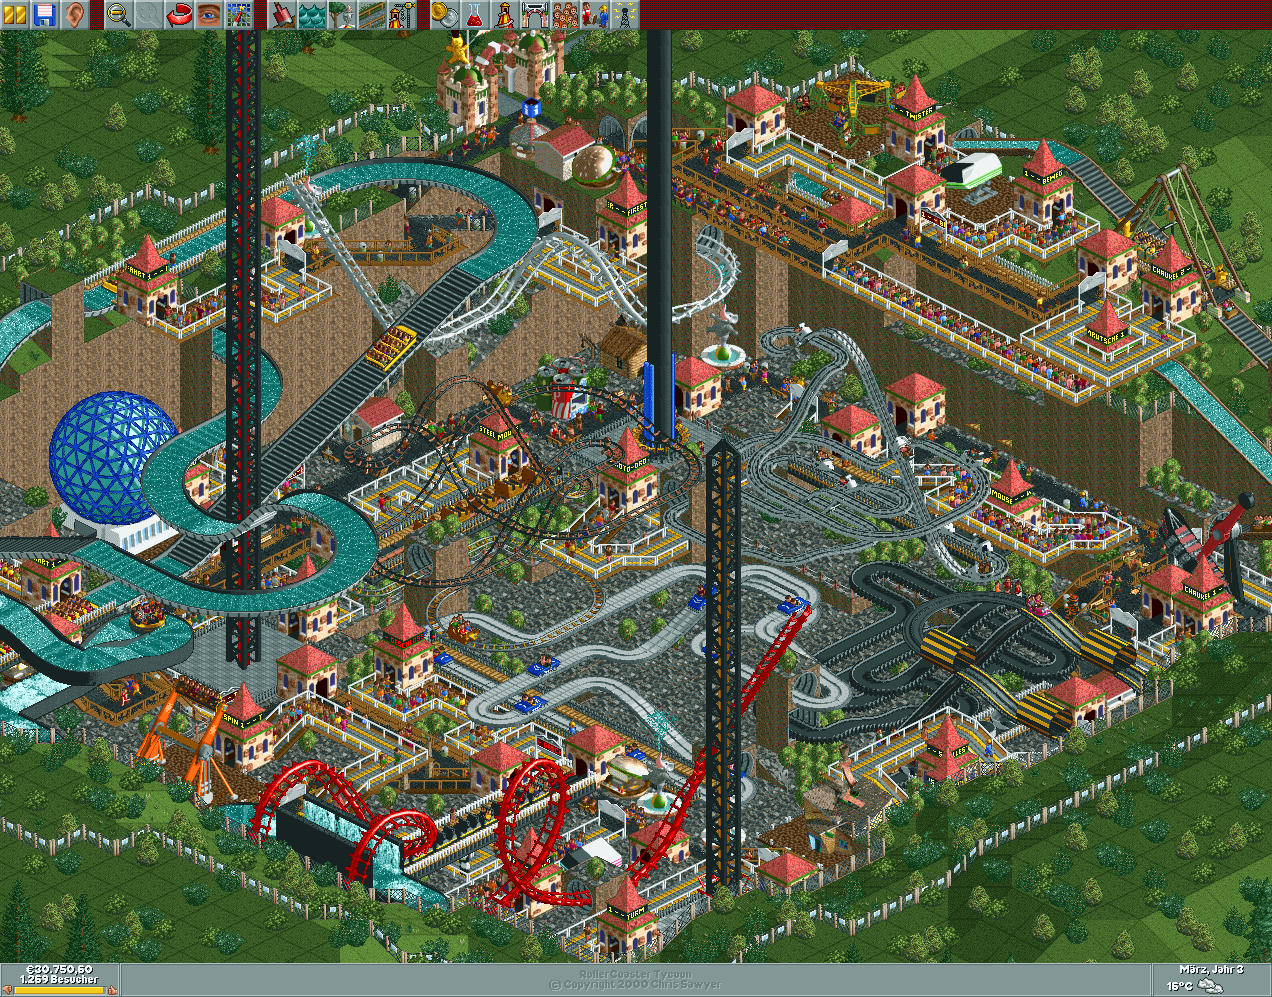 Mineral Park - RollerCoaster Tycoon